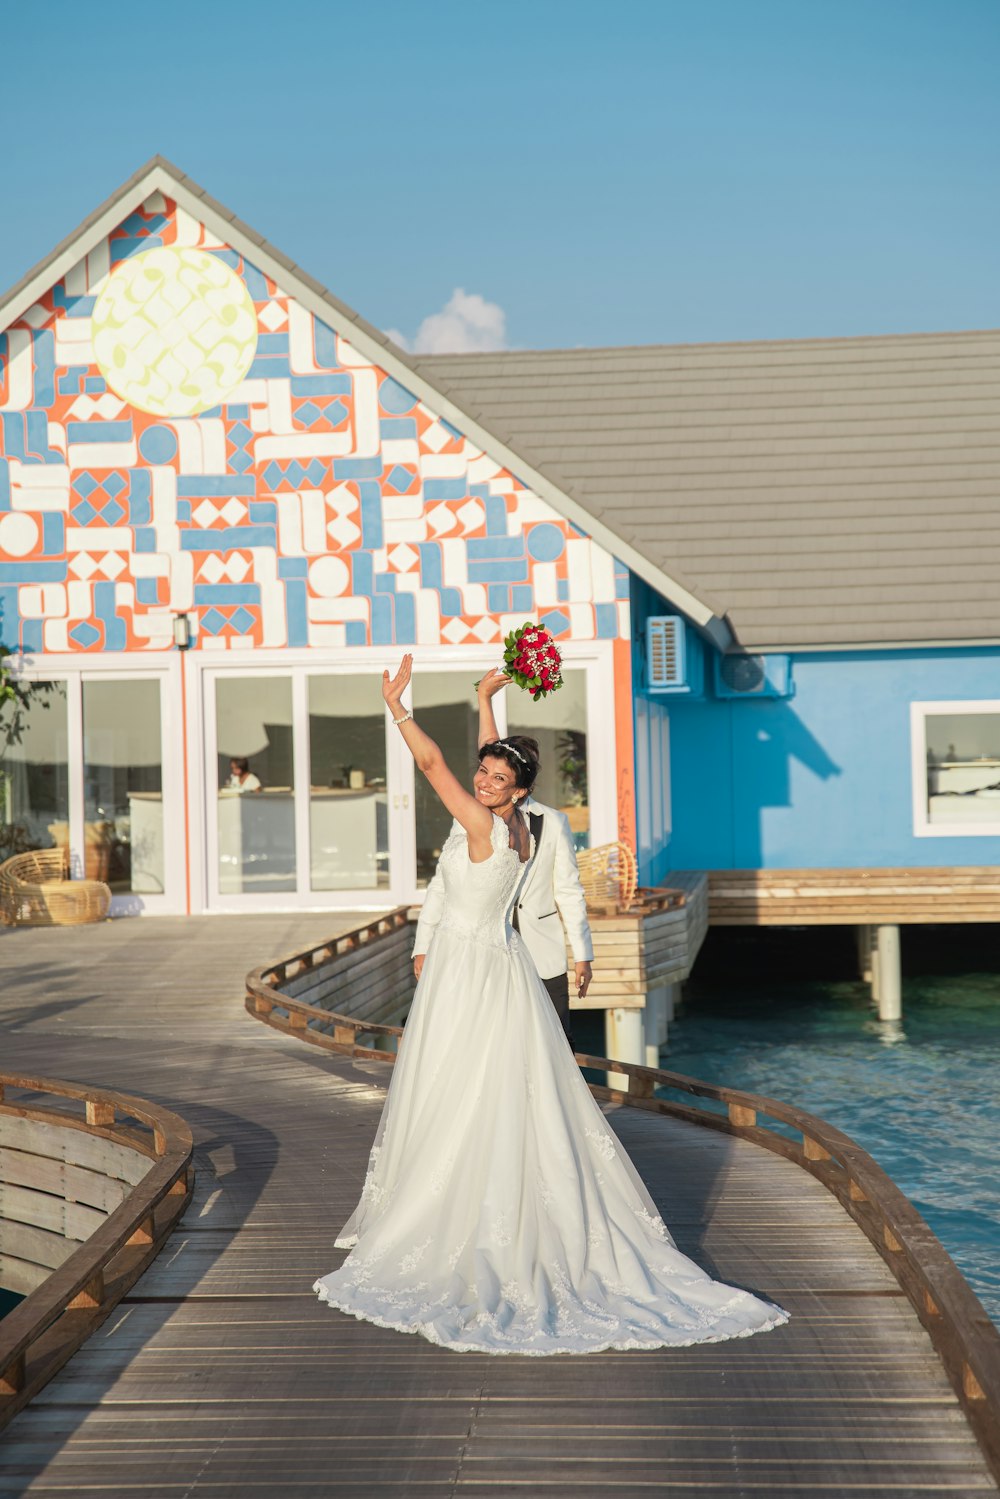 woman in white wedding dress standing on brown wooden dock during daytime